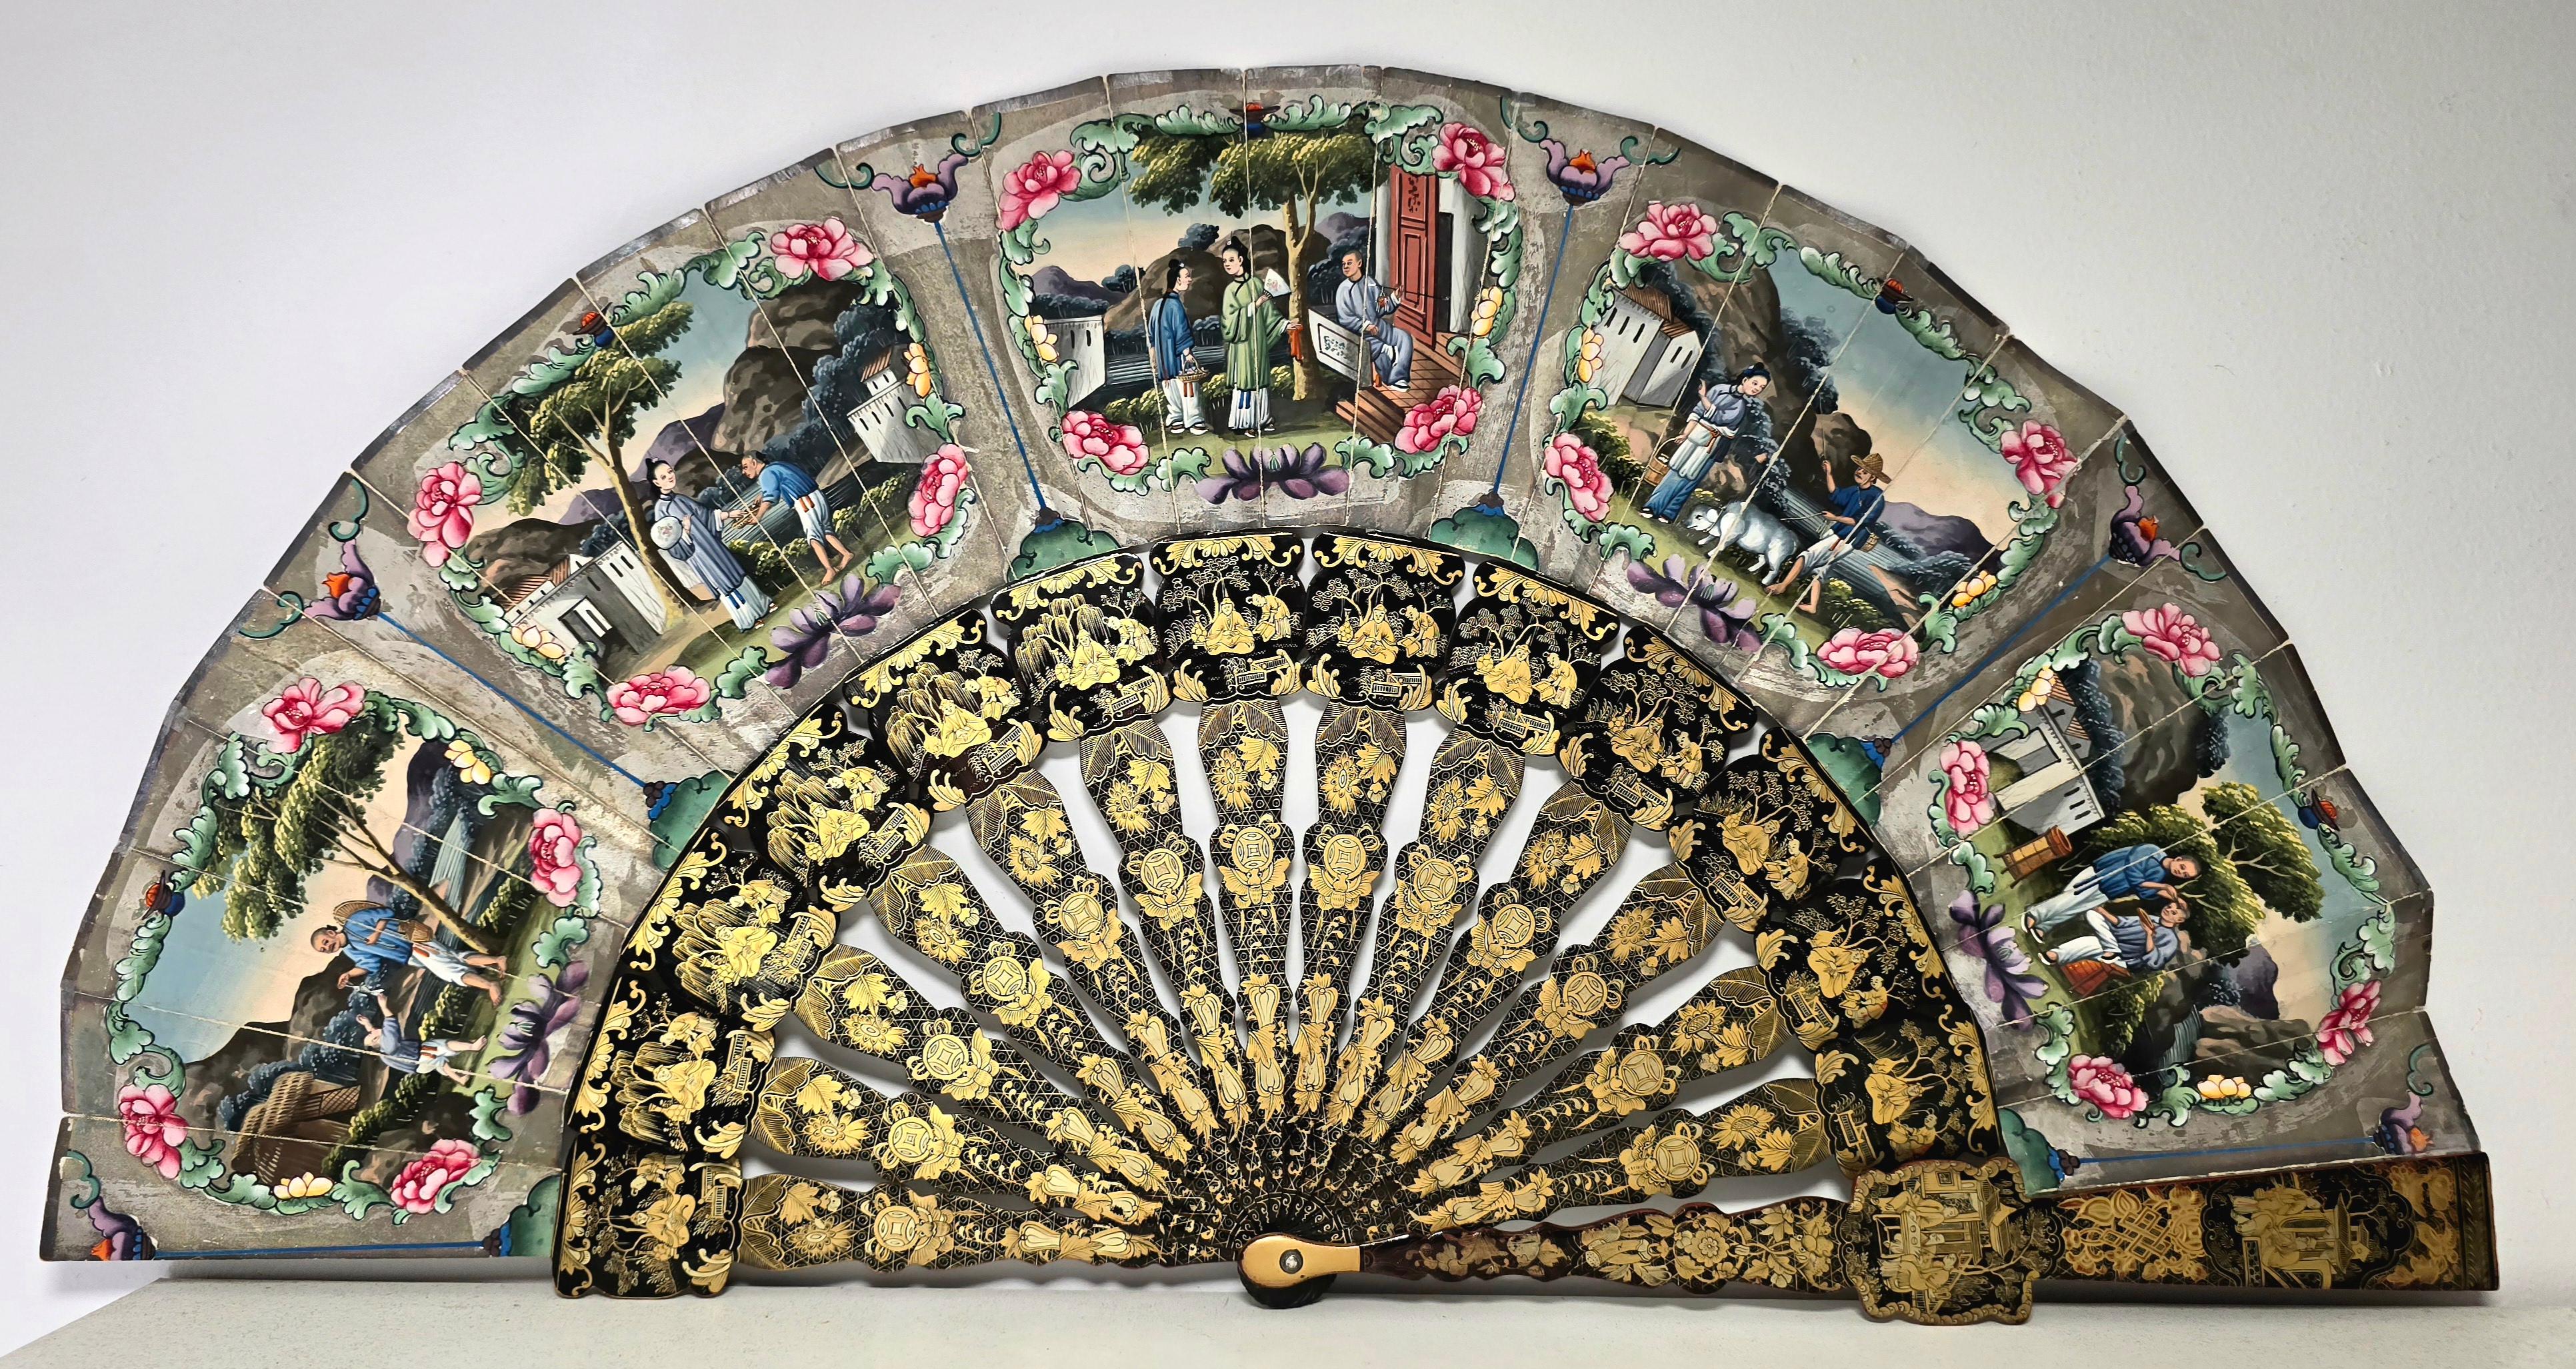 This exquisite Filipino fan from the 19th century is a captivating piece, hand-painted with scenes of everyday life. The fan showcases the rich cultural heritage and artistic traditions of the Philippines during the 19th century. With its delicate